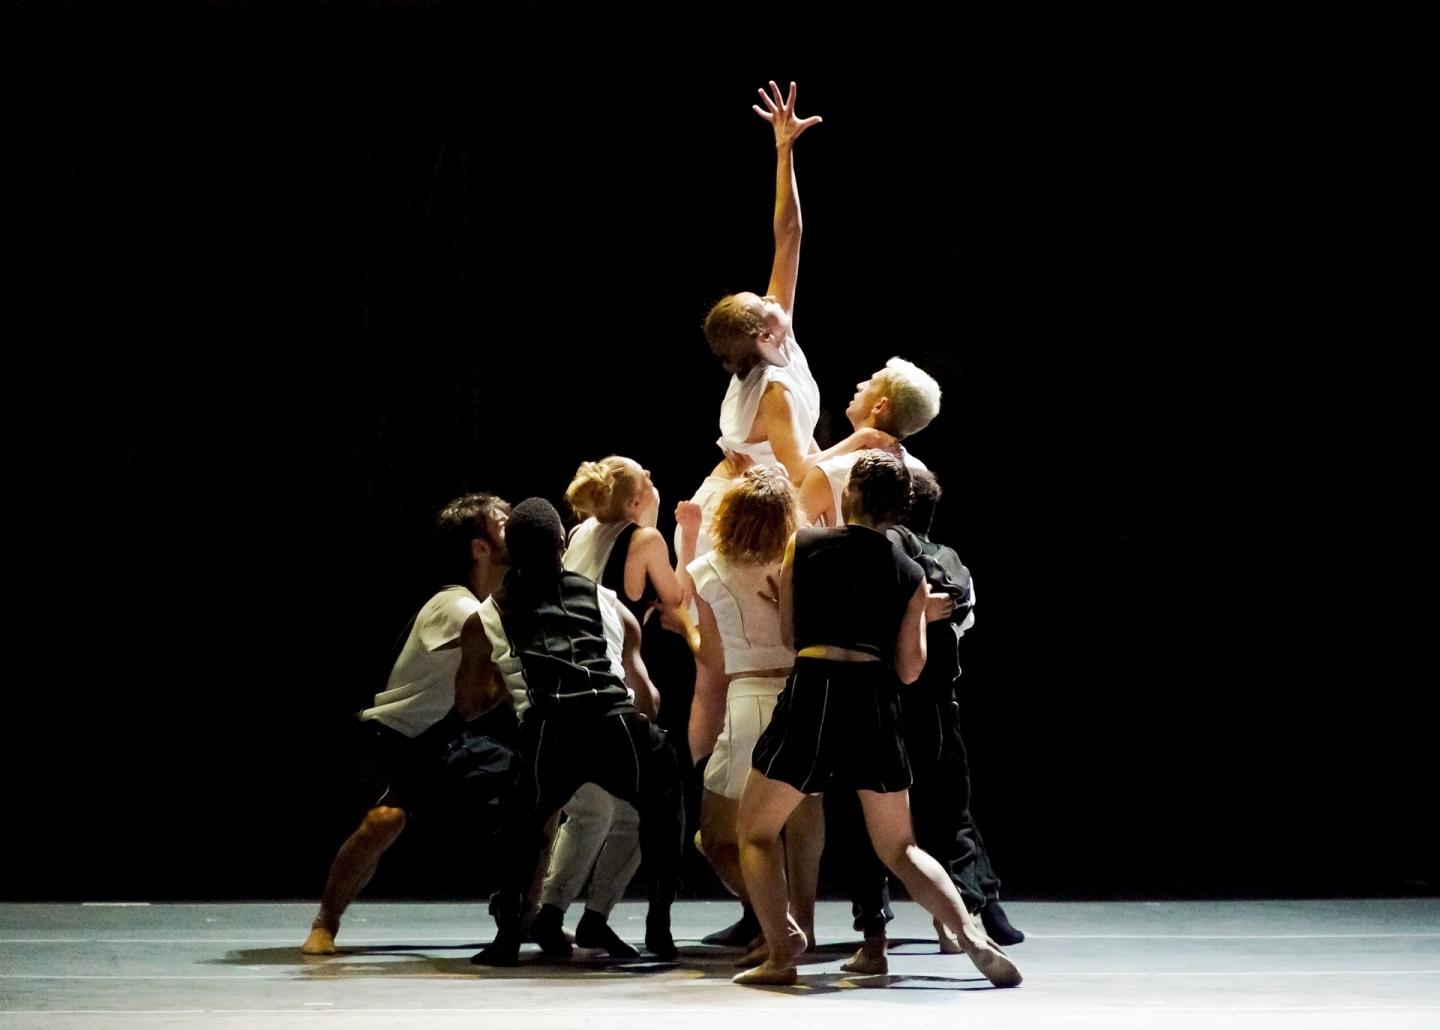 Bach Studies I Fall, I Flow, I Melt By Benjamin Millepied & L.a. Dance Project